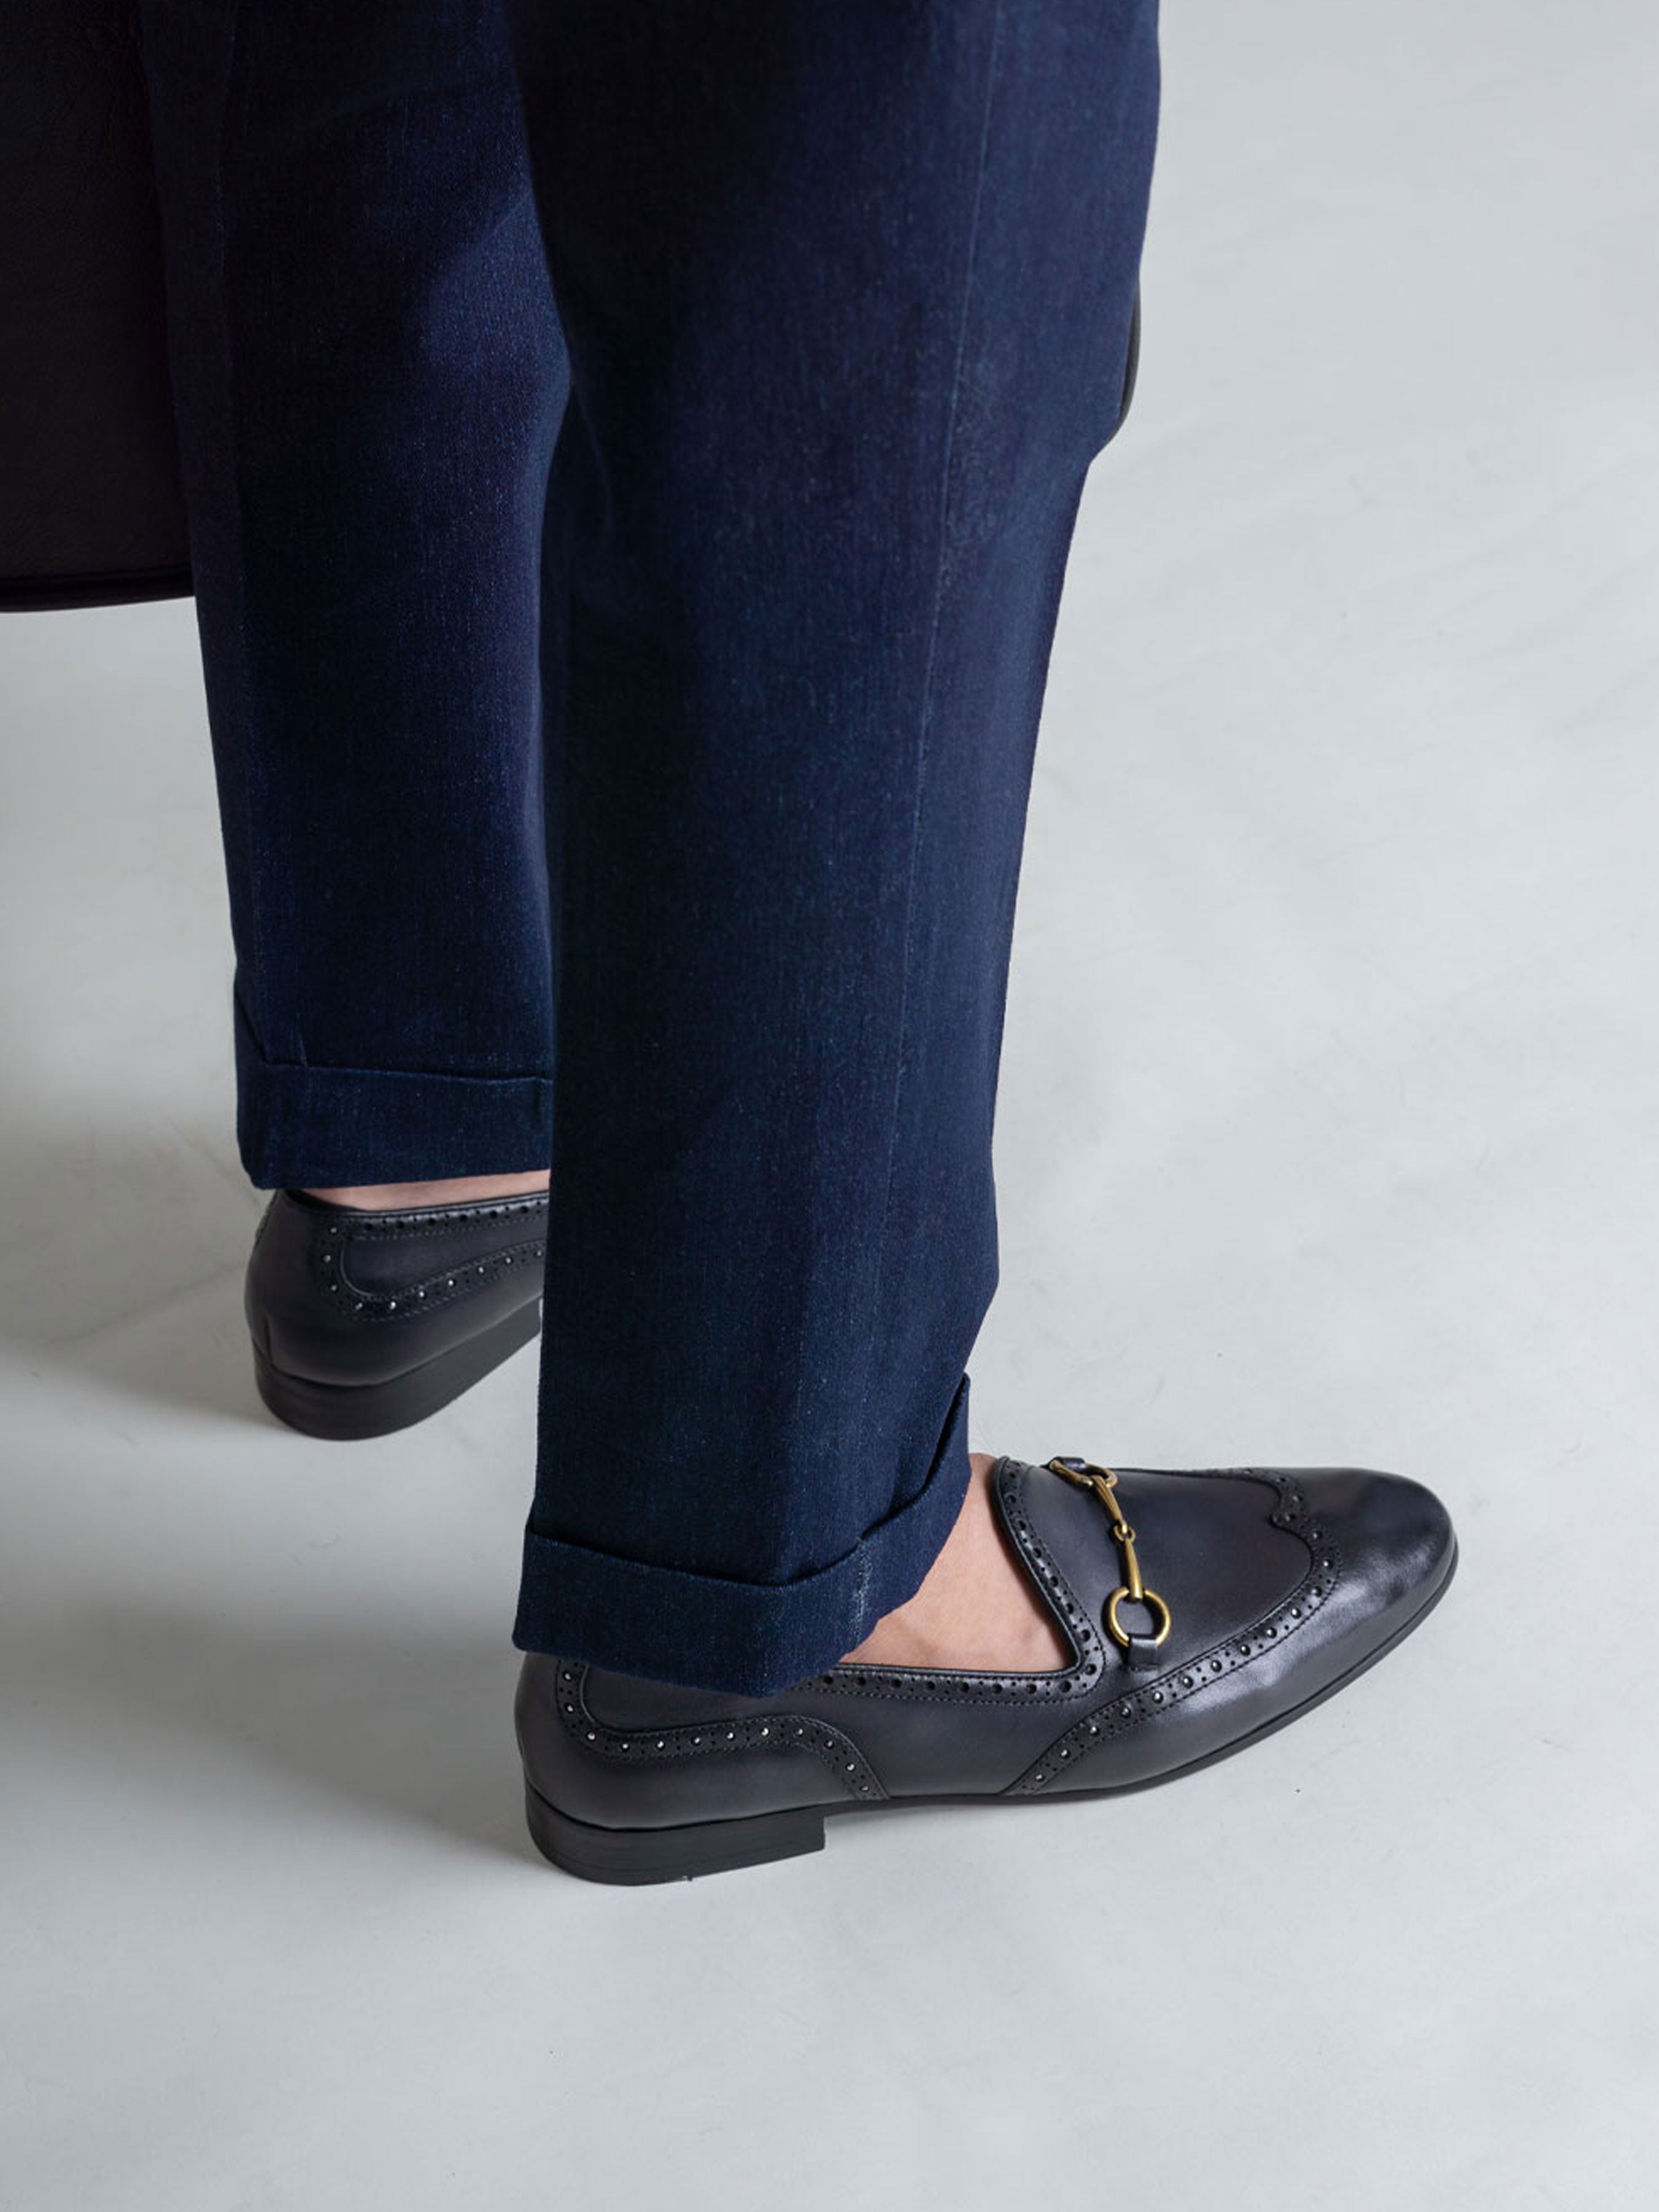 Belgian Loafer Horsebit Buckle - Black Grey with Studded Wingtip (Hand Painted Patina) - Zeve Shoes